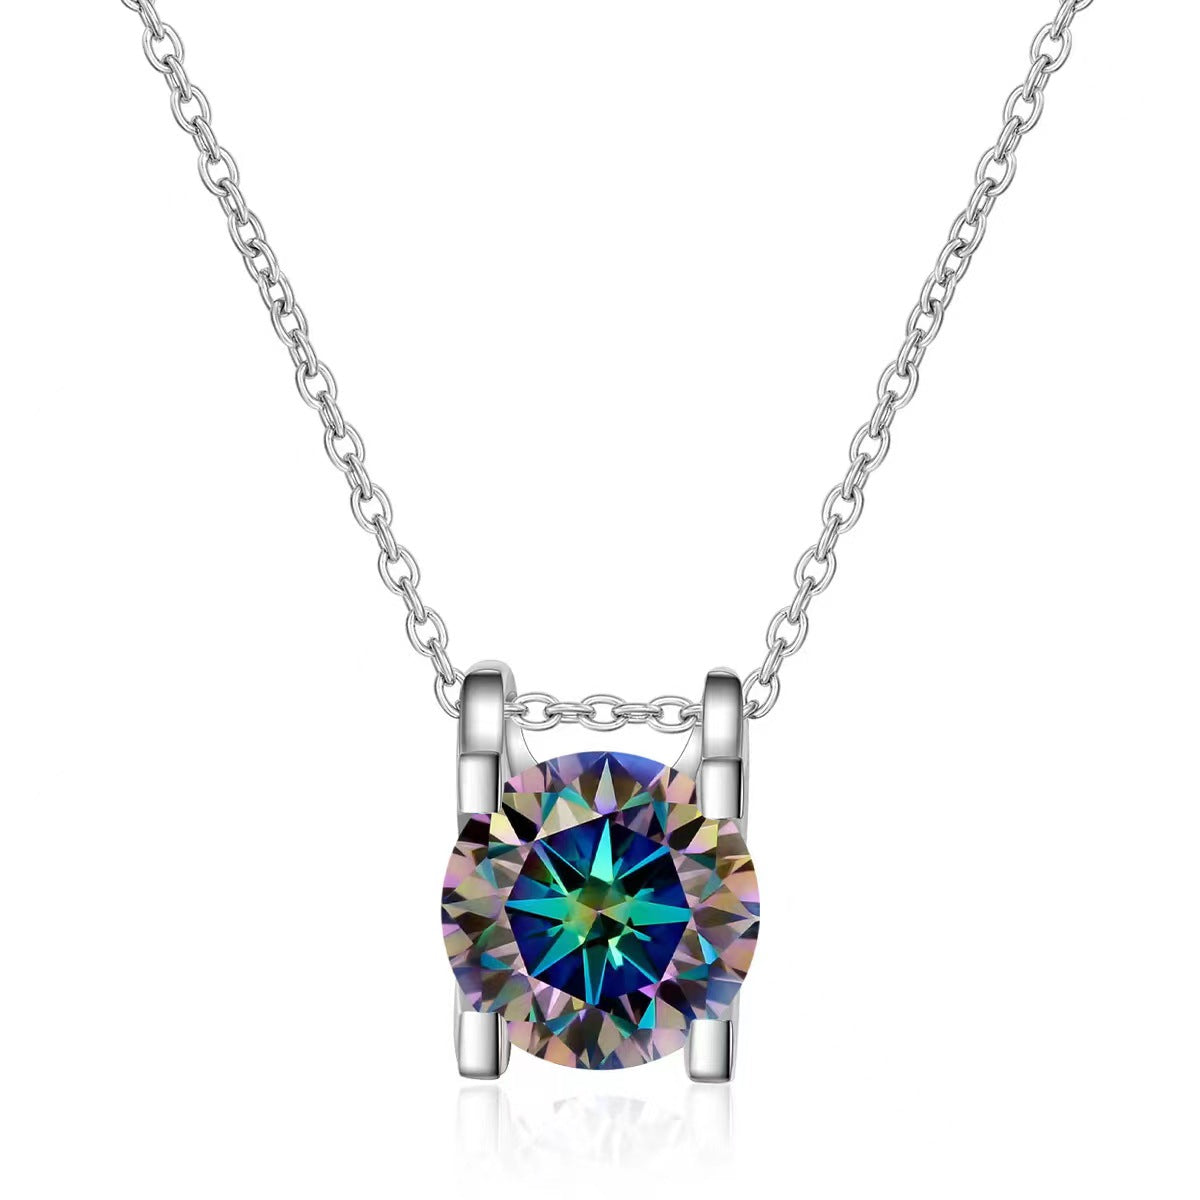 Colorful Moissanite necklace for women